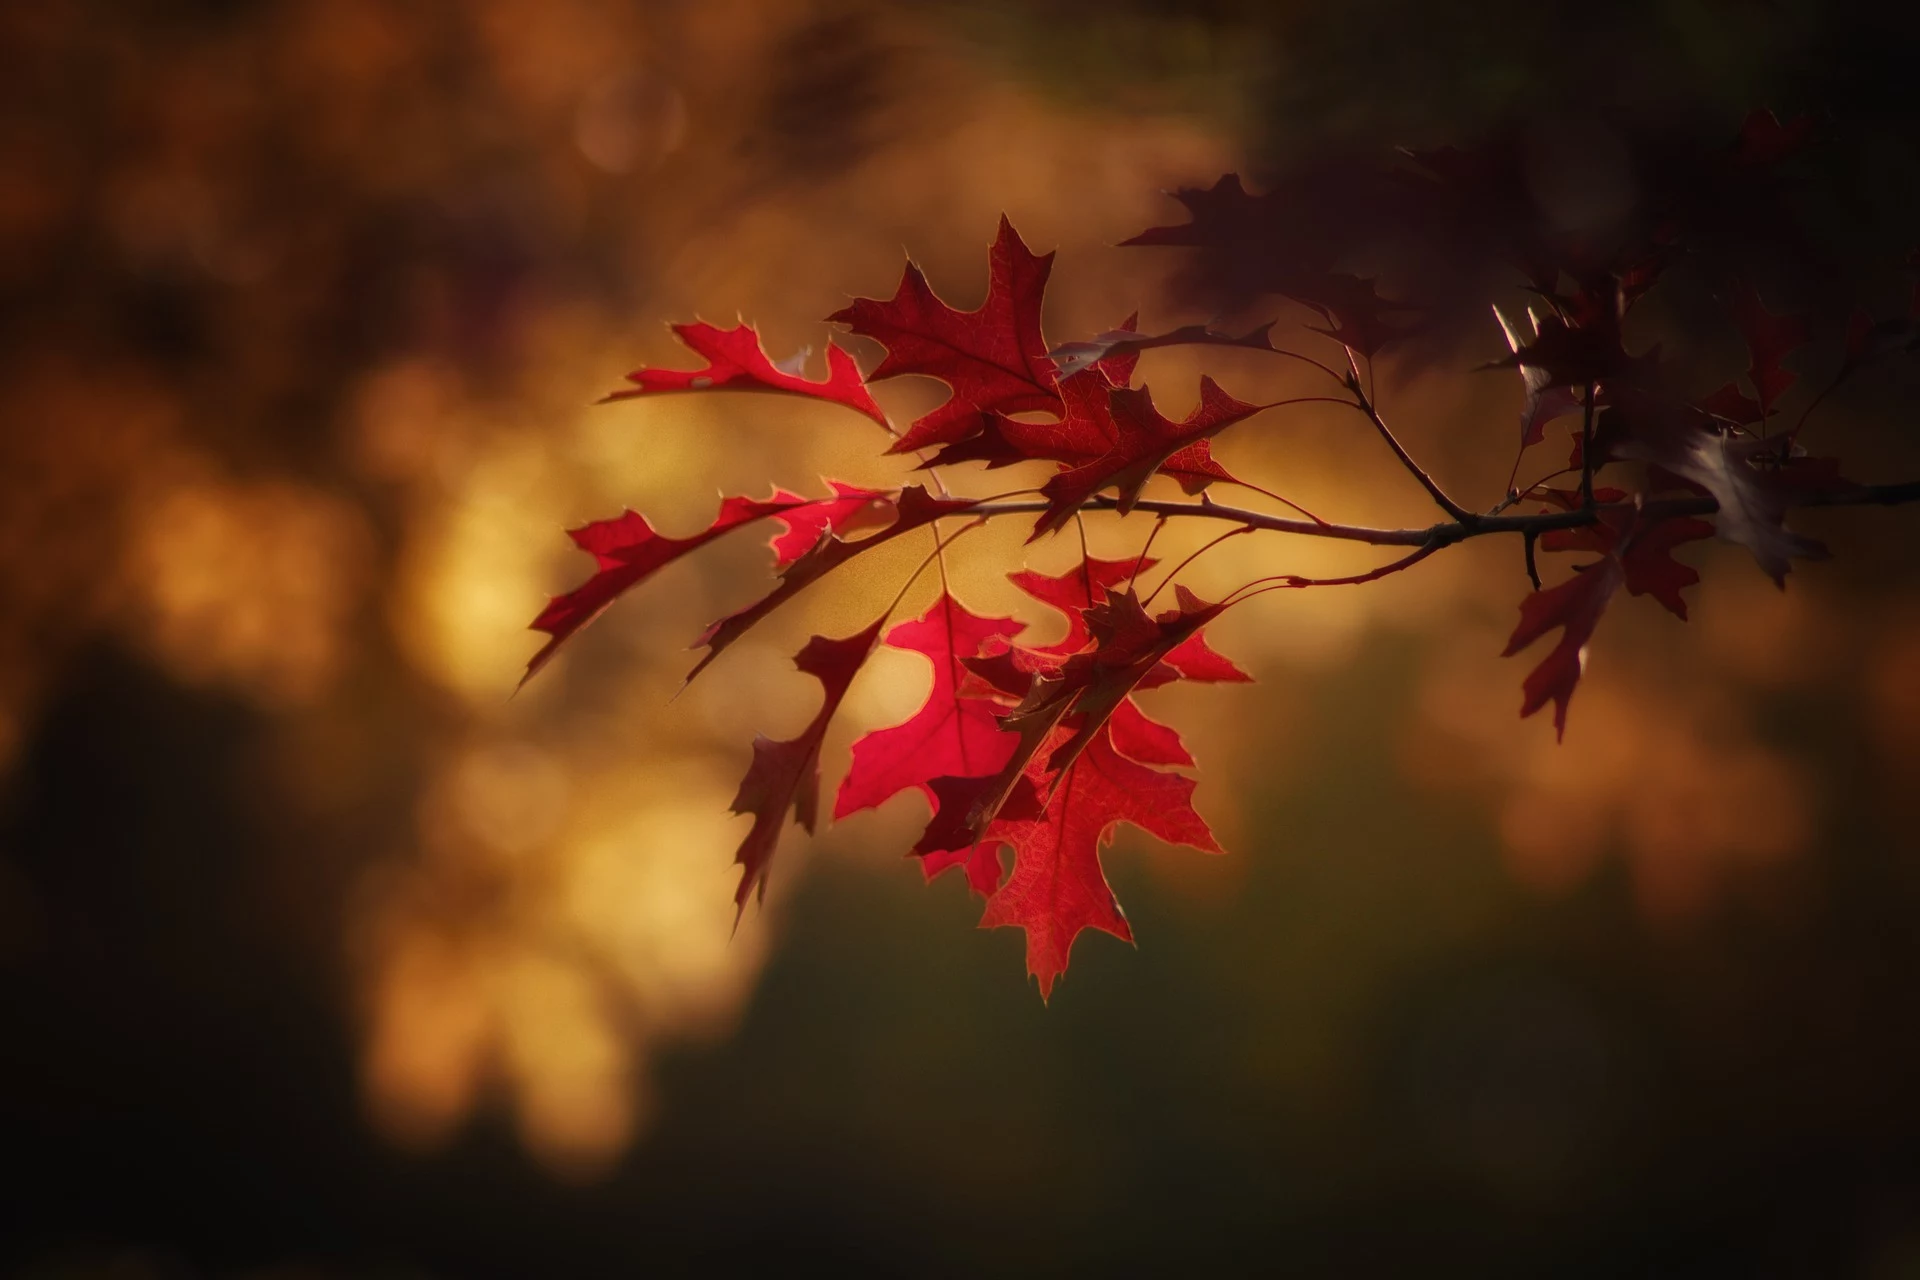 red fall leaves, on a small thin branch, seen in close up, thanksgiving greetings, blurry brown background